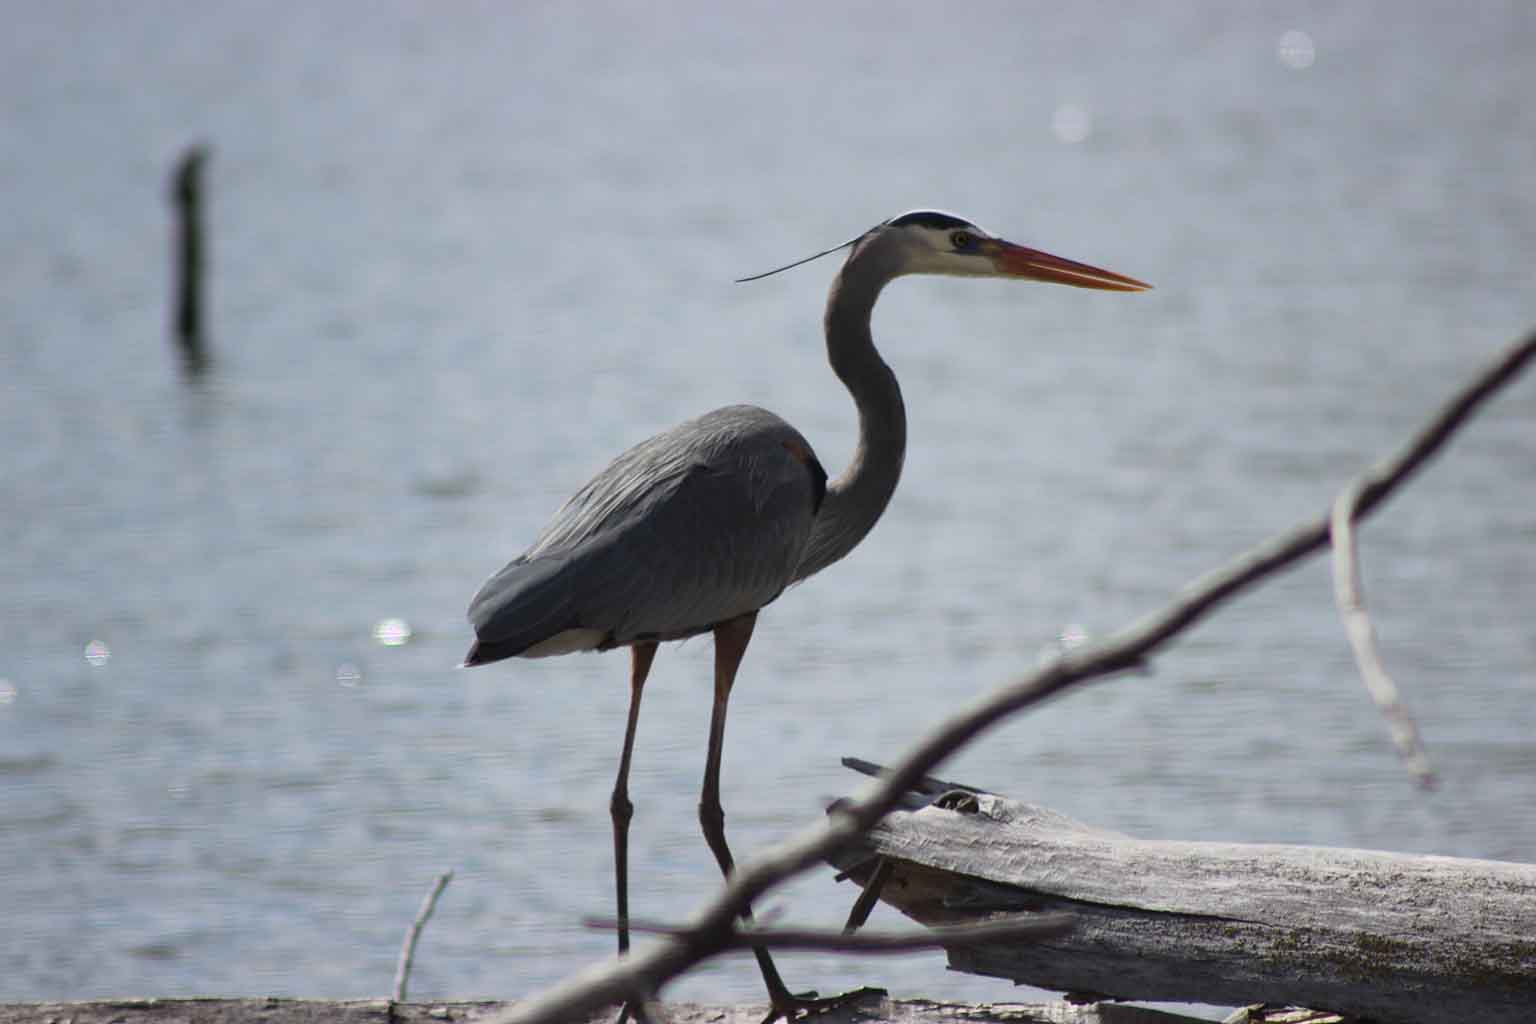 A blue heron stands at the water's edge